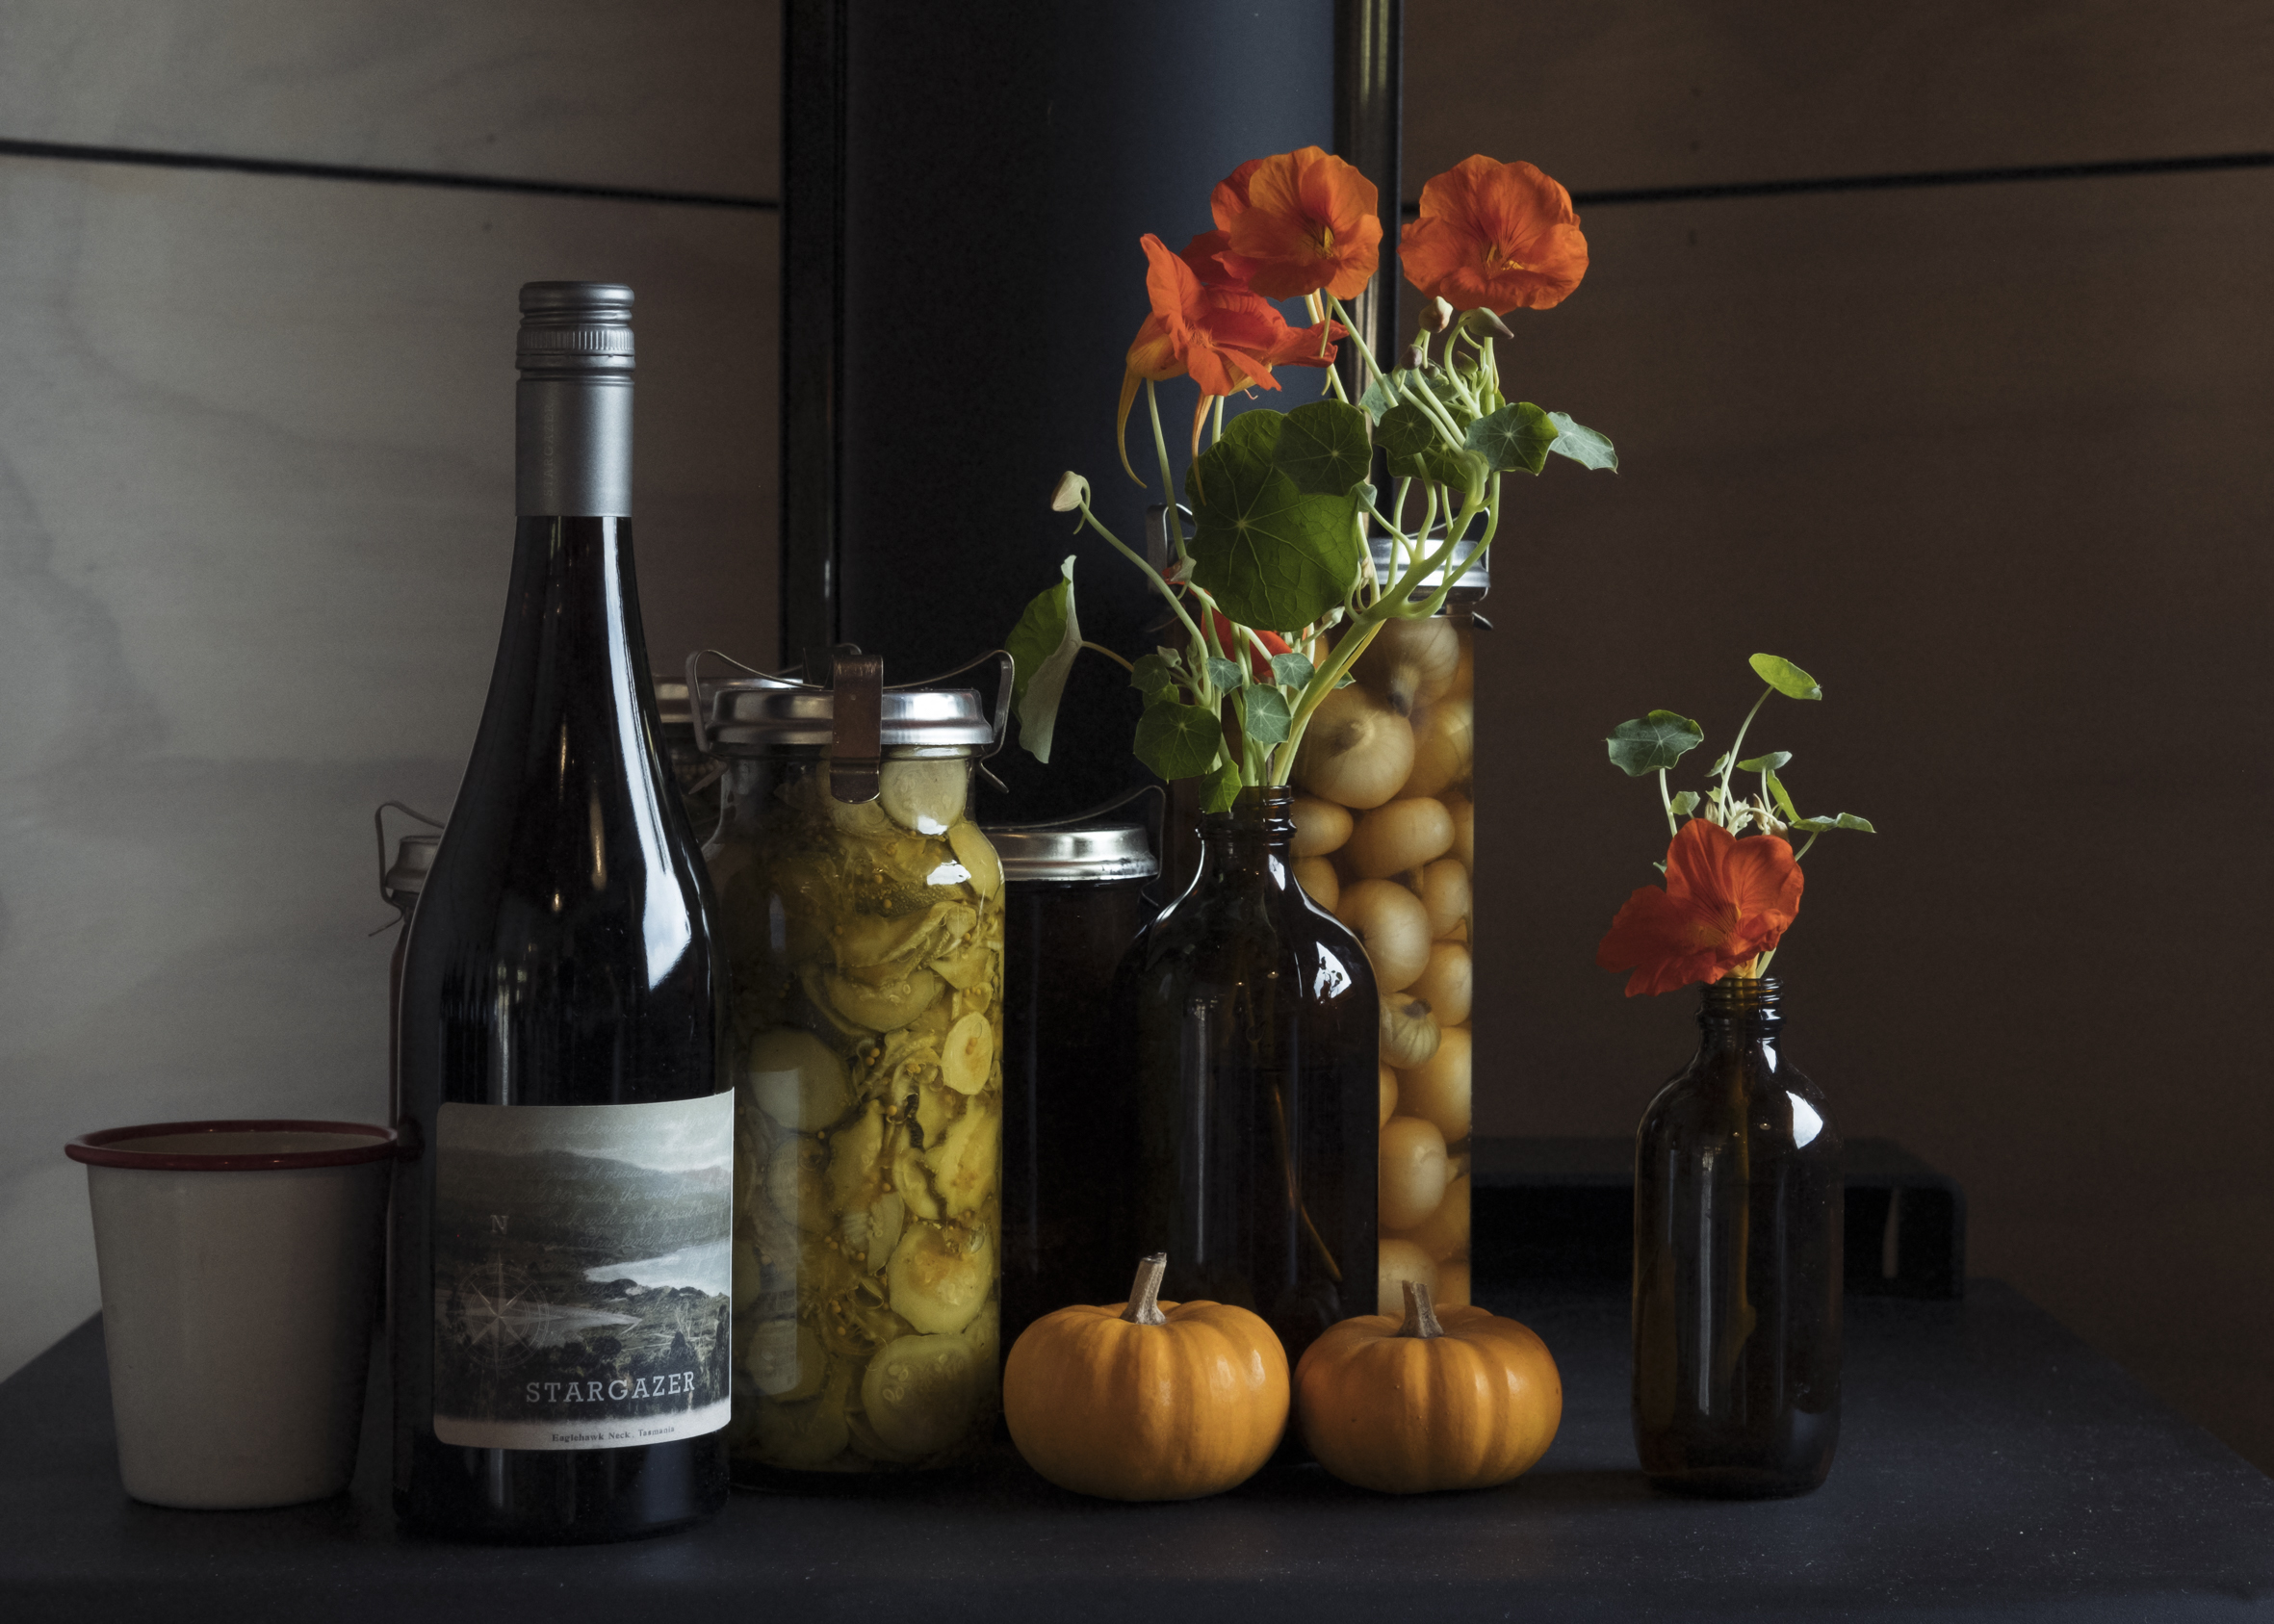 Wine bottle on table with small pumpkins, bottle of pickled vegetables,  and bottles with flowers